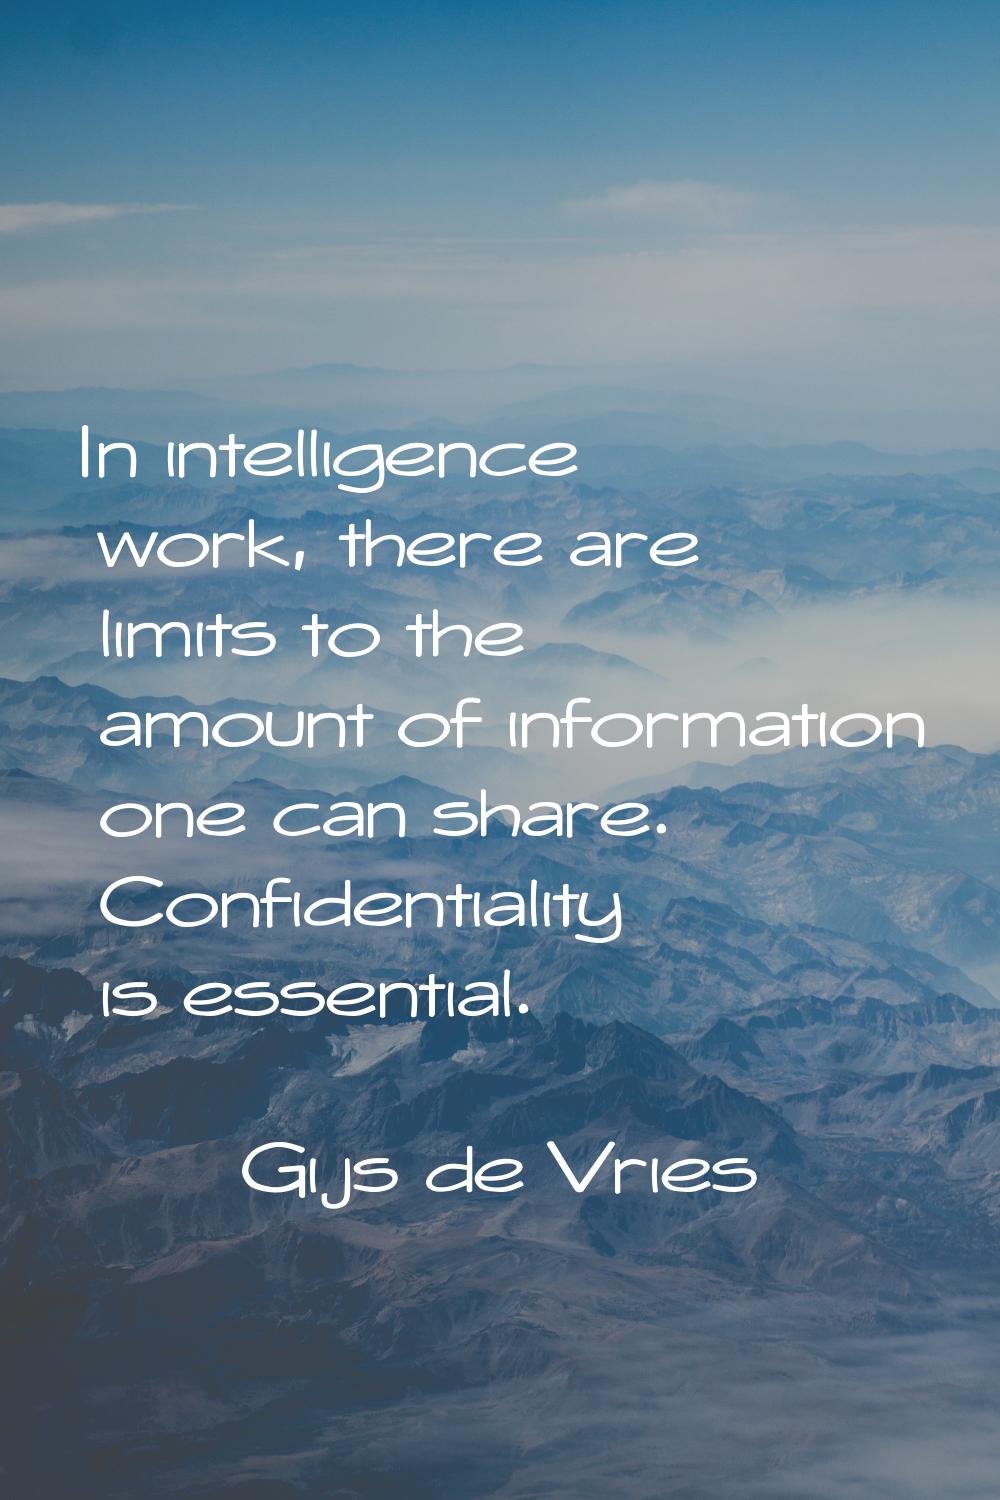 In intelligence work, there are limits to the amount of information one can share. Confidentiality 